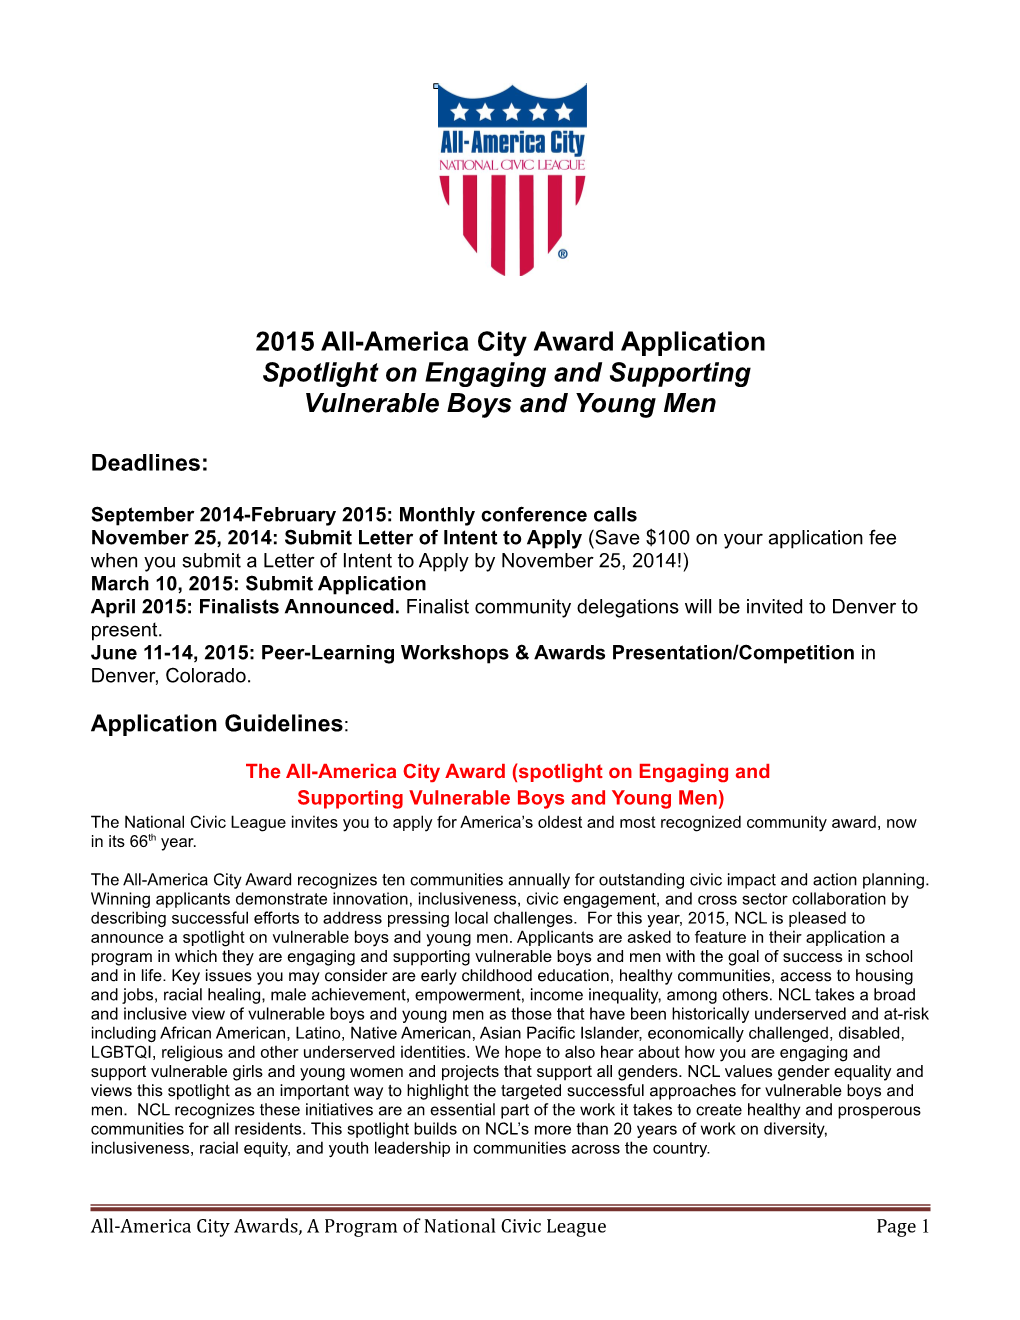 2015 All-America City Award Application Spotlight on Engaging and Supporting Vulnerable Boys and Young Men